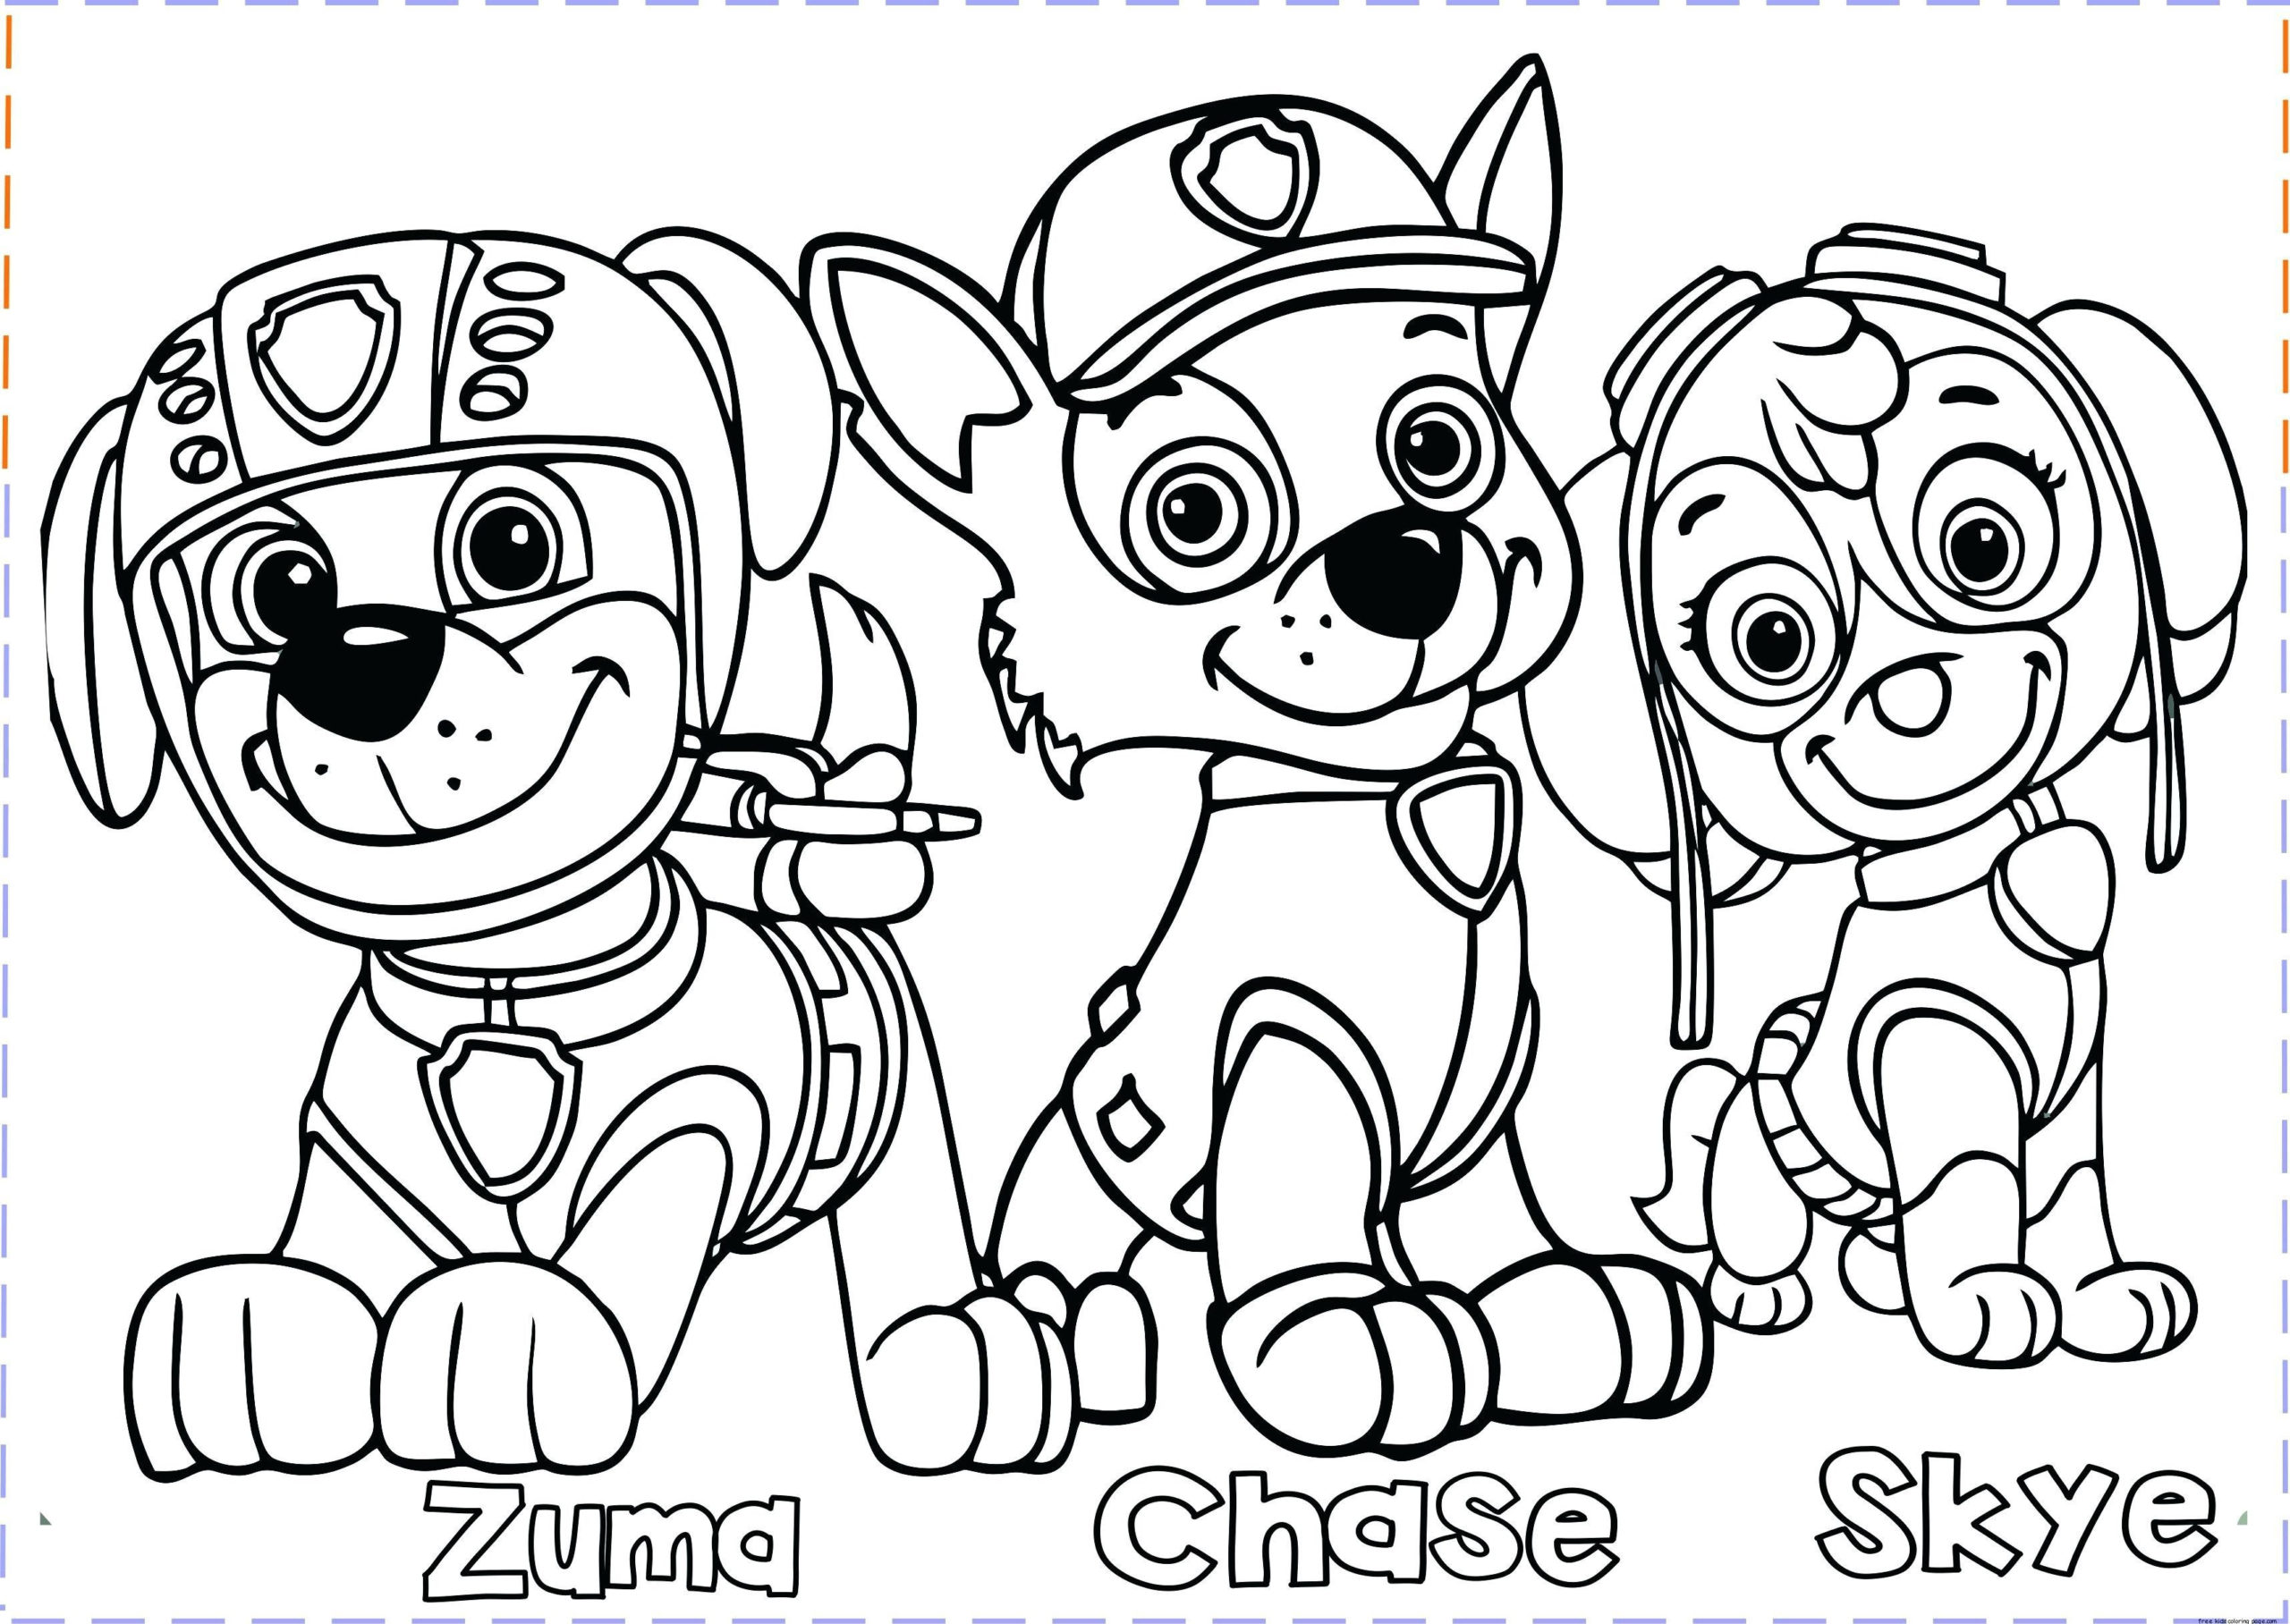 Paw Patrol Coloring Pages : Kitchen Cabinet Coloring Pictures Paw Patrol Skye Coloring Images Paw Patrol Characters Disney Coloring Images Paw Patrol Characters Also Kitchen Cabinets : The friendly rescuers of the paw patrol, along with ryder, are ready to help.